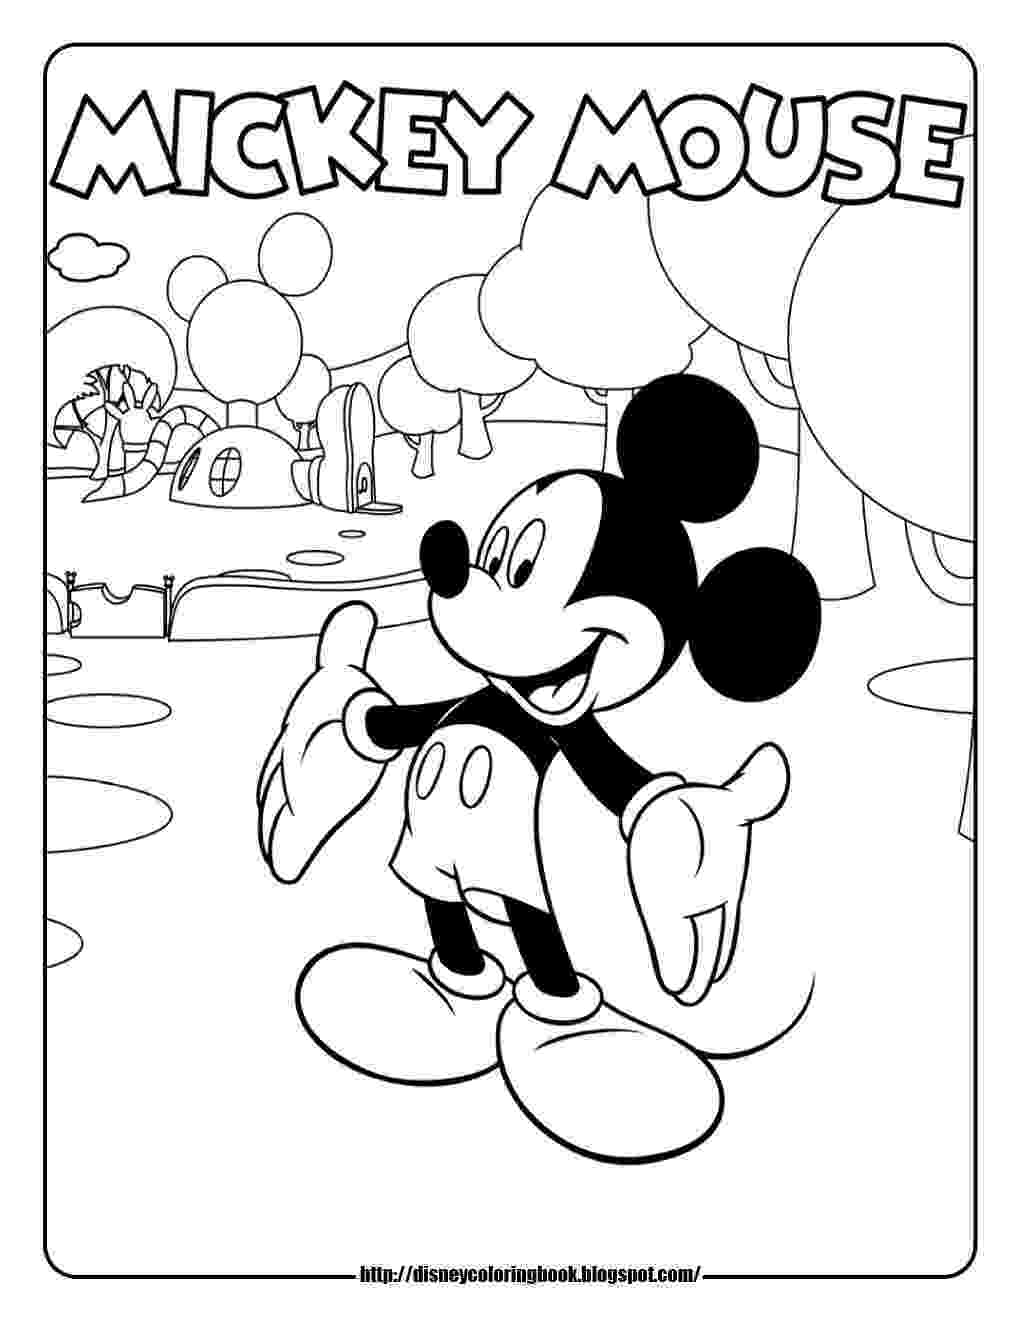 mickey mouse coloring page mickey mouse clubhouse 1 free disney coloring sheets page mickey coloring mouse 